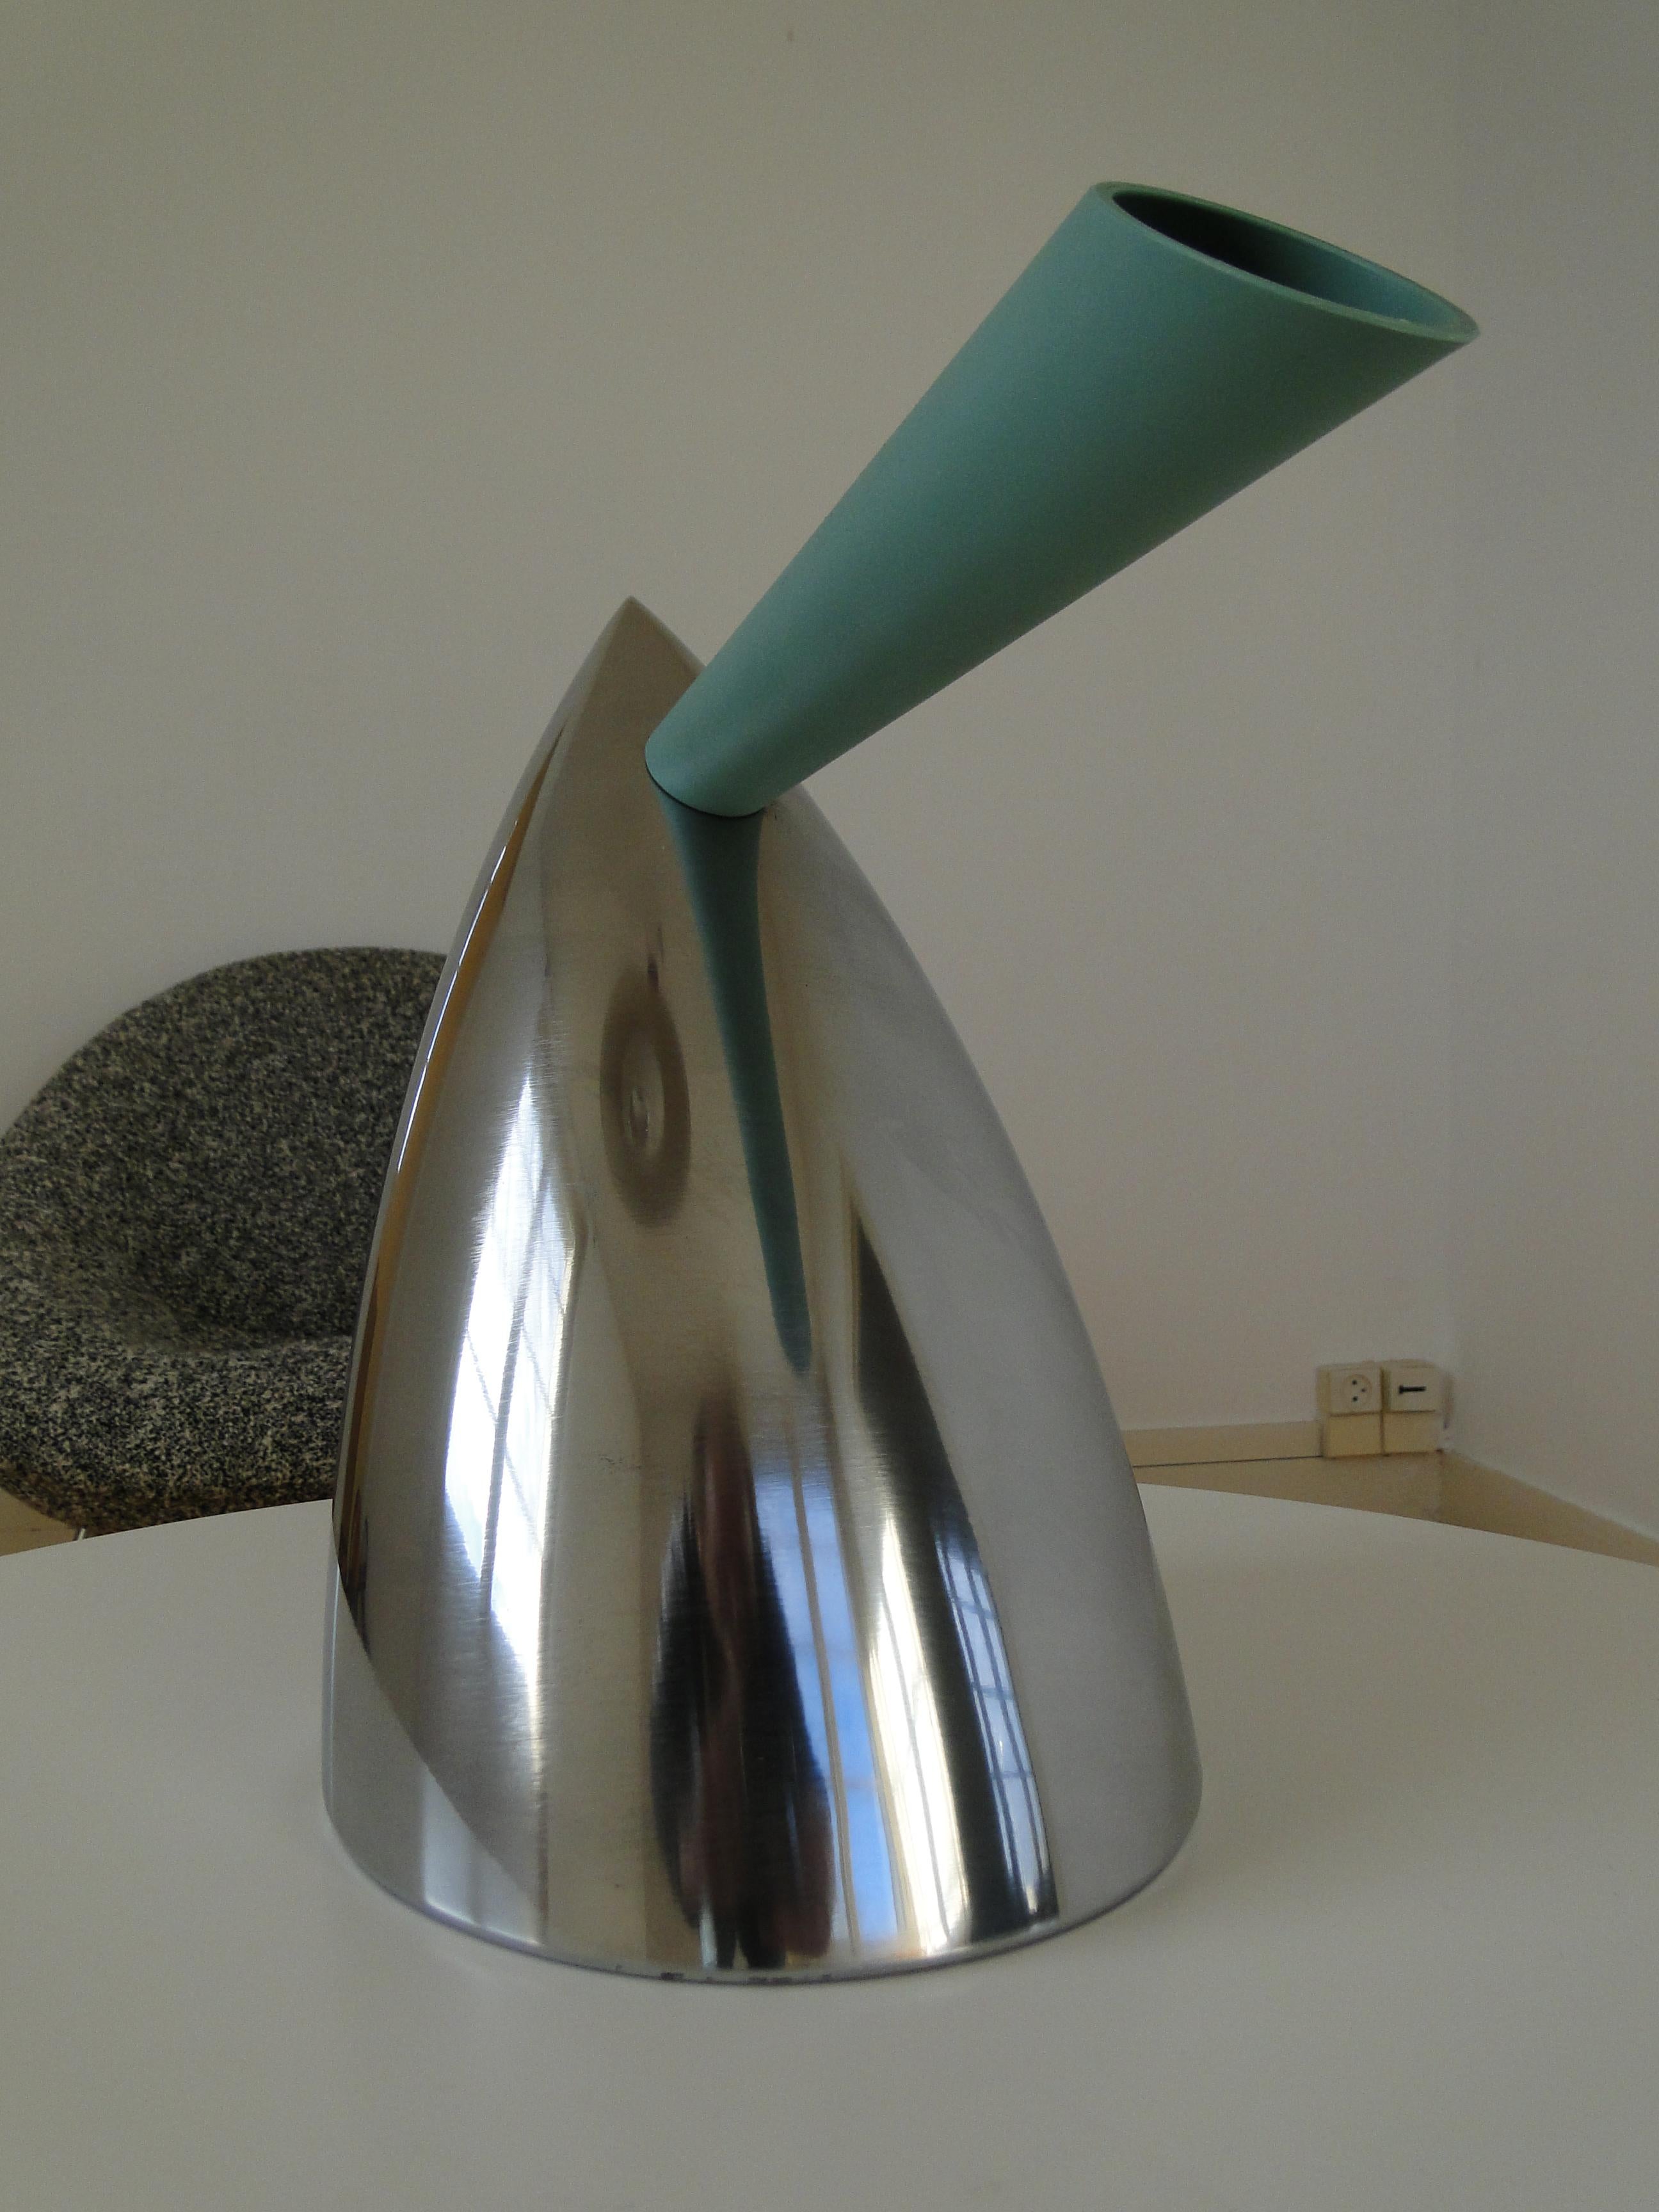 philippe starck alessi kettle